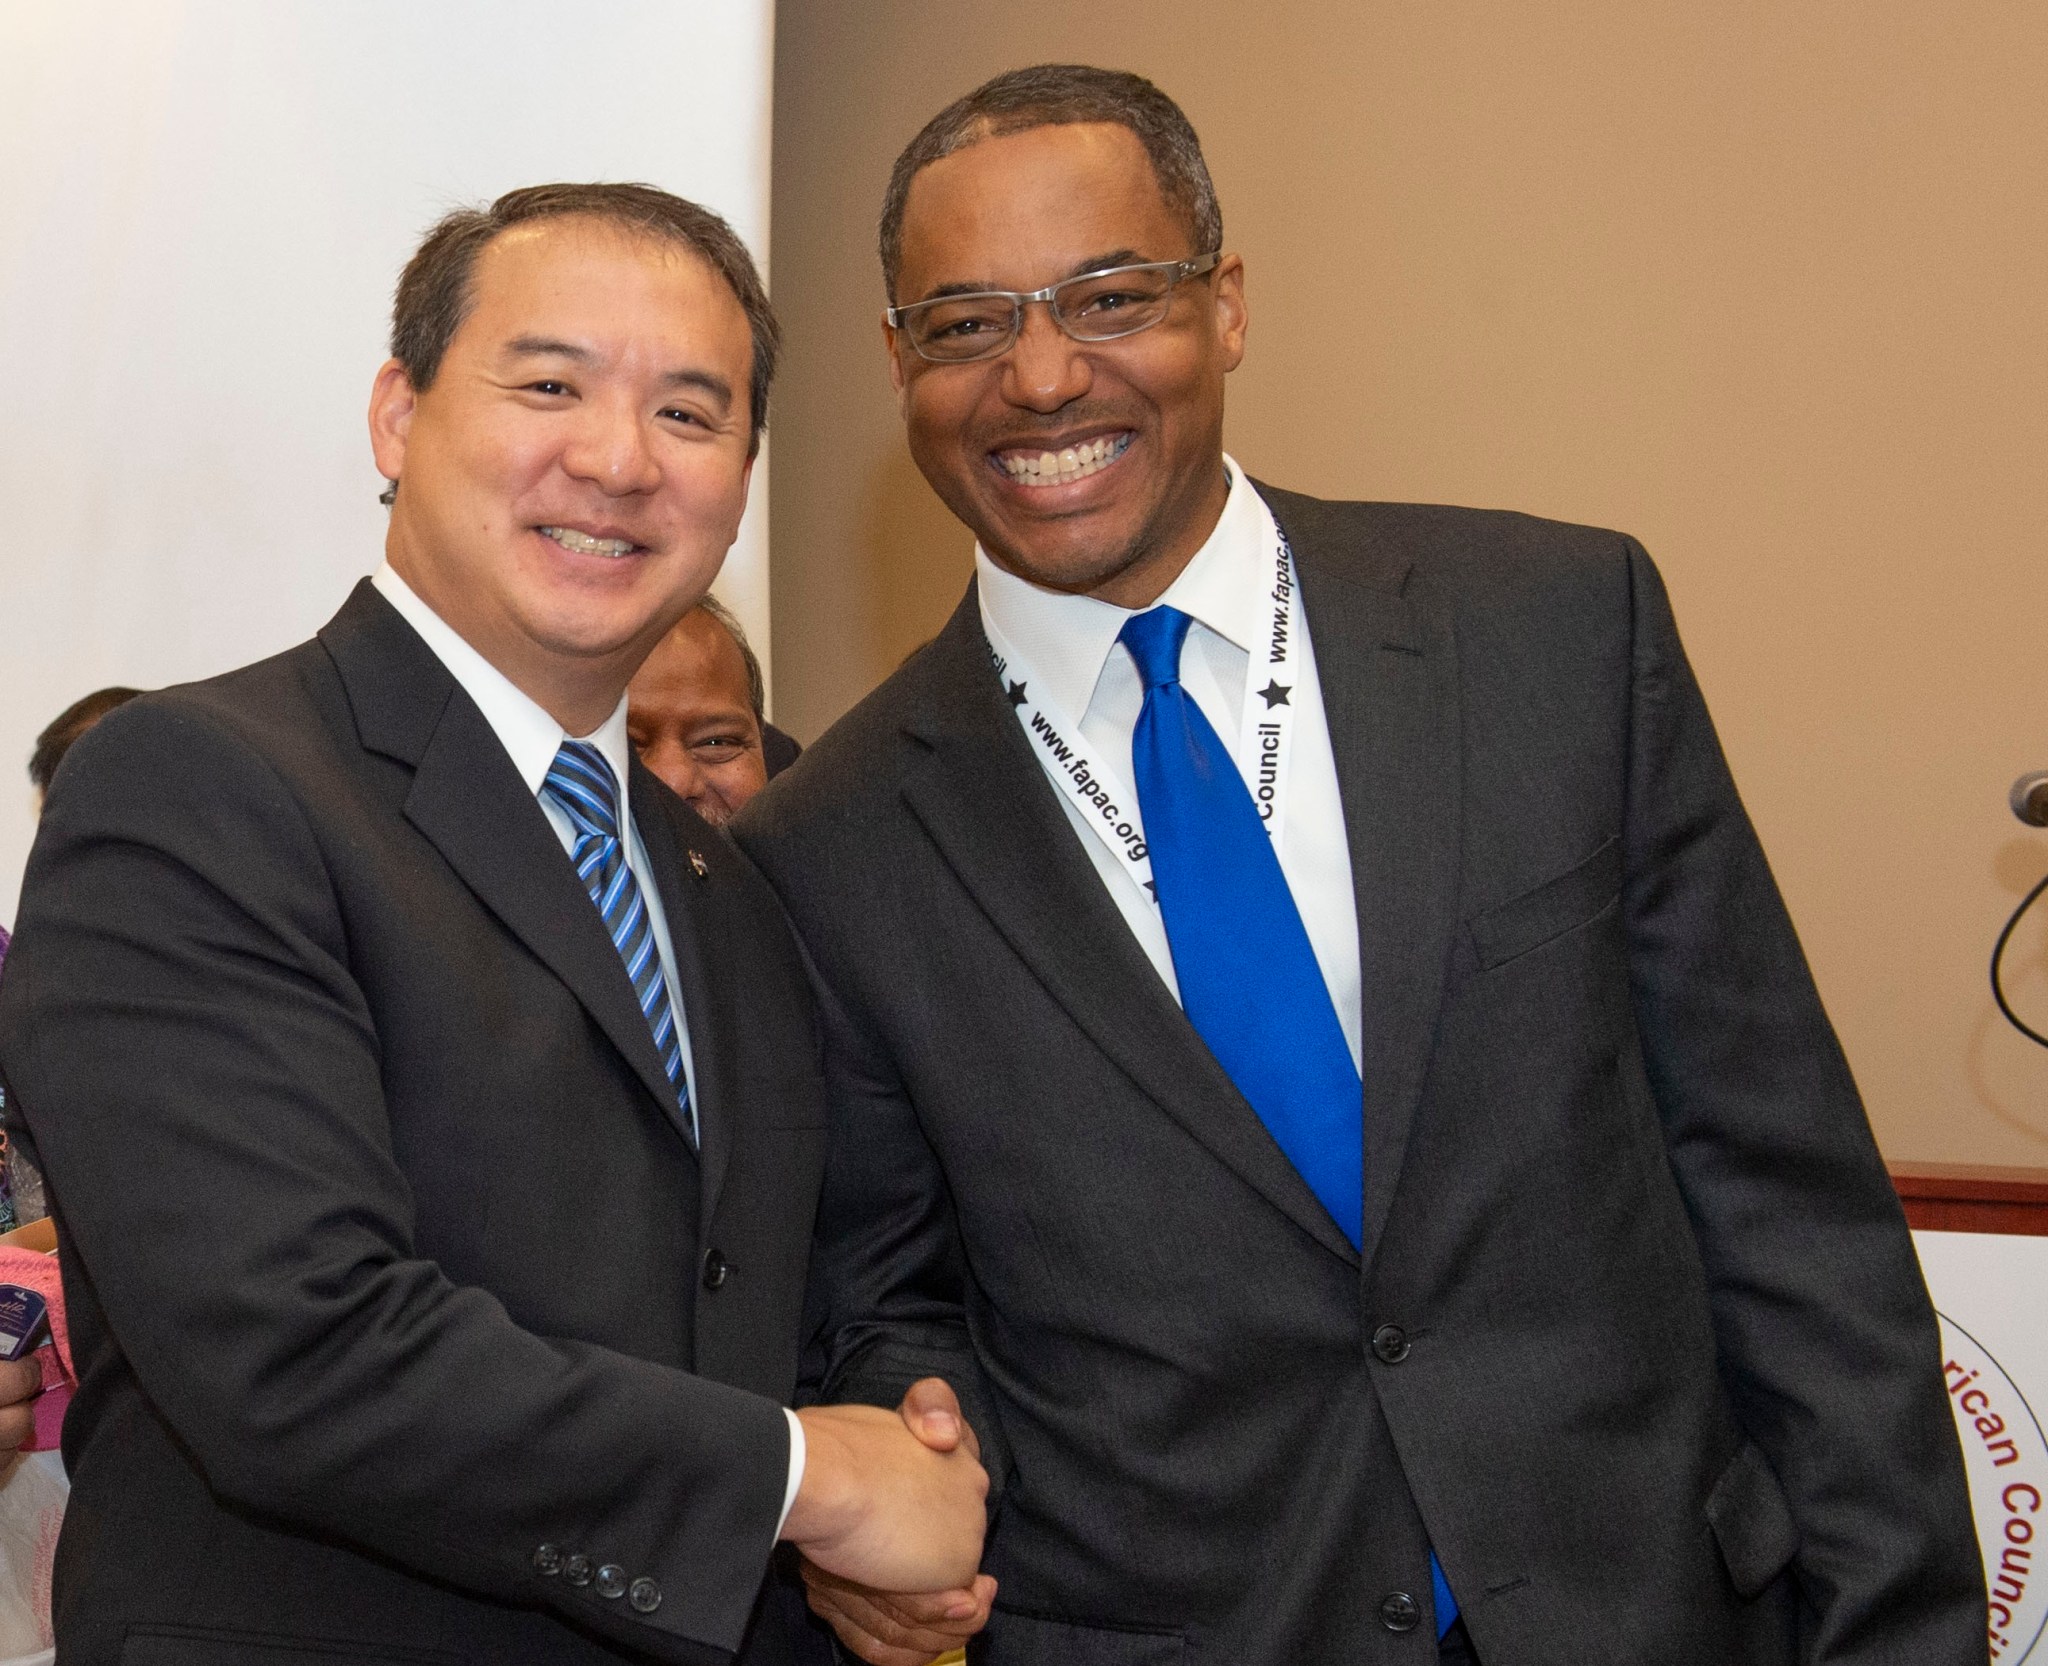 Steve Shih is greeted after his opening address by Melvin McKinstry.